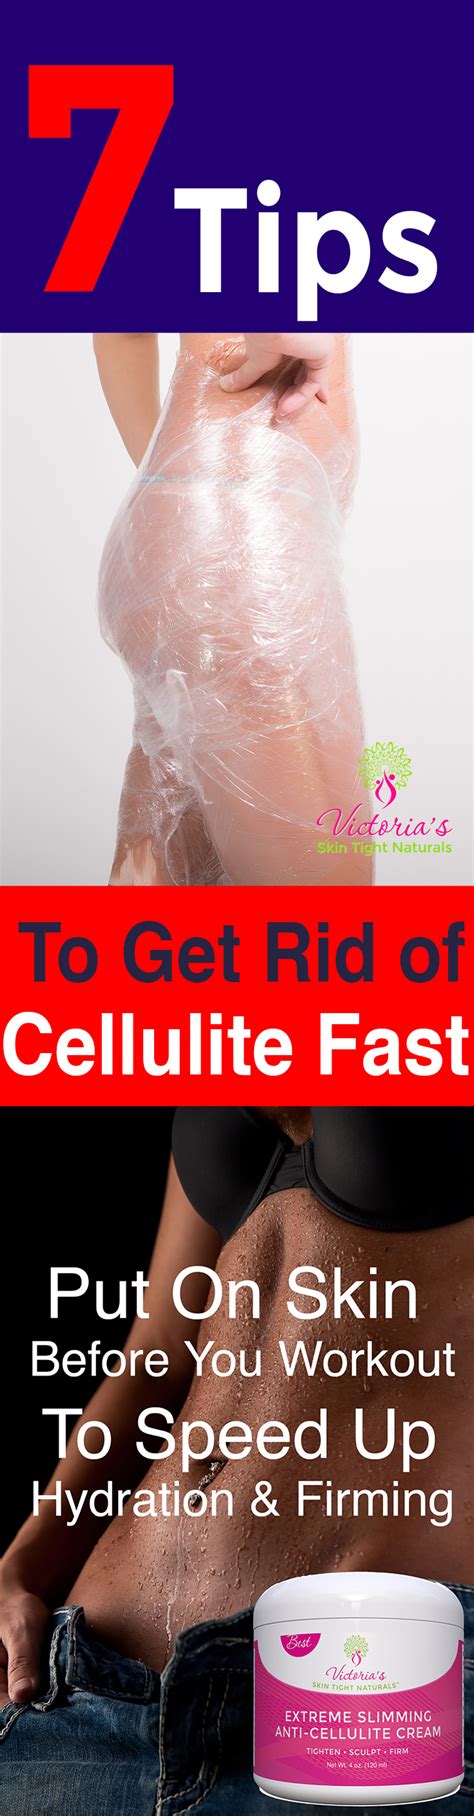 How To Get Rid Of Cellulite Skin Tight Naturals